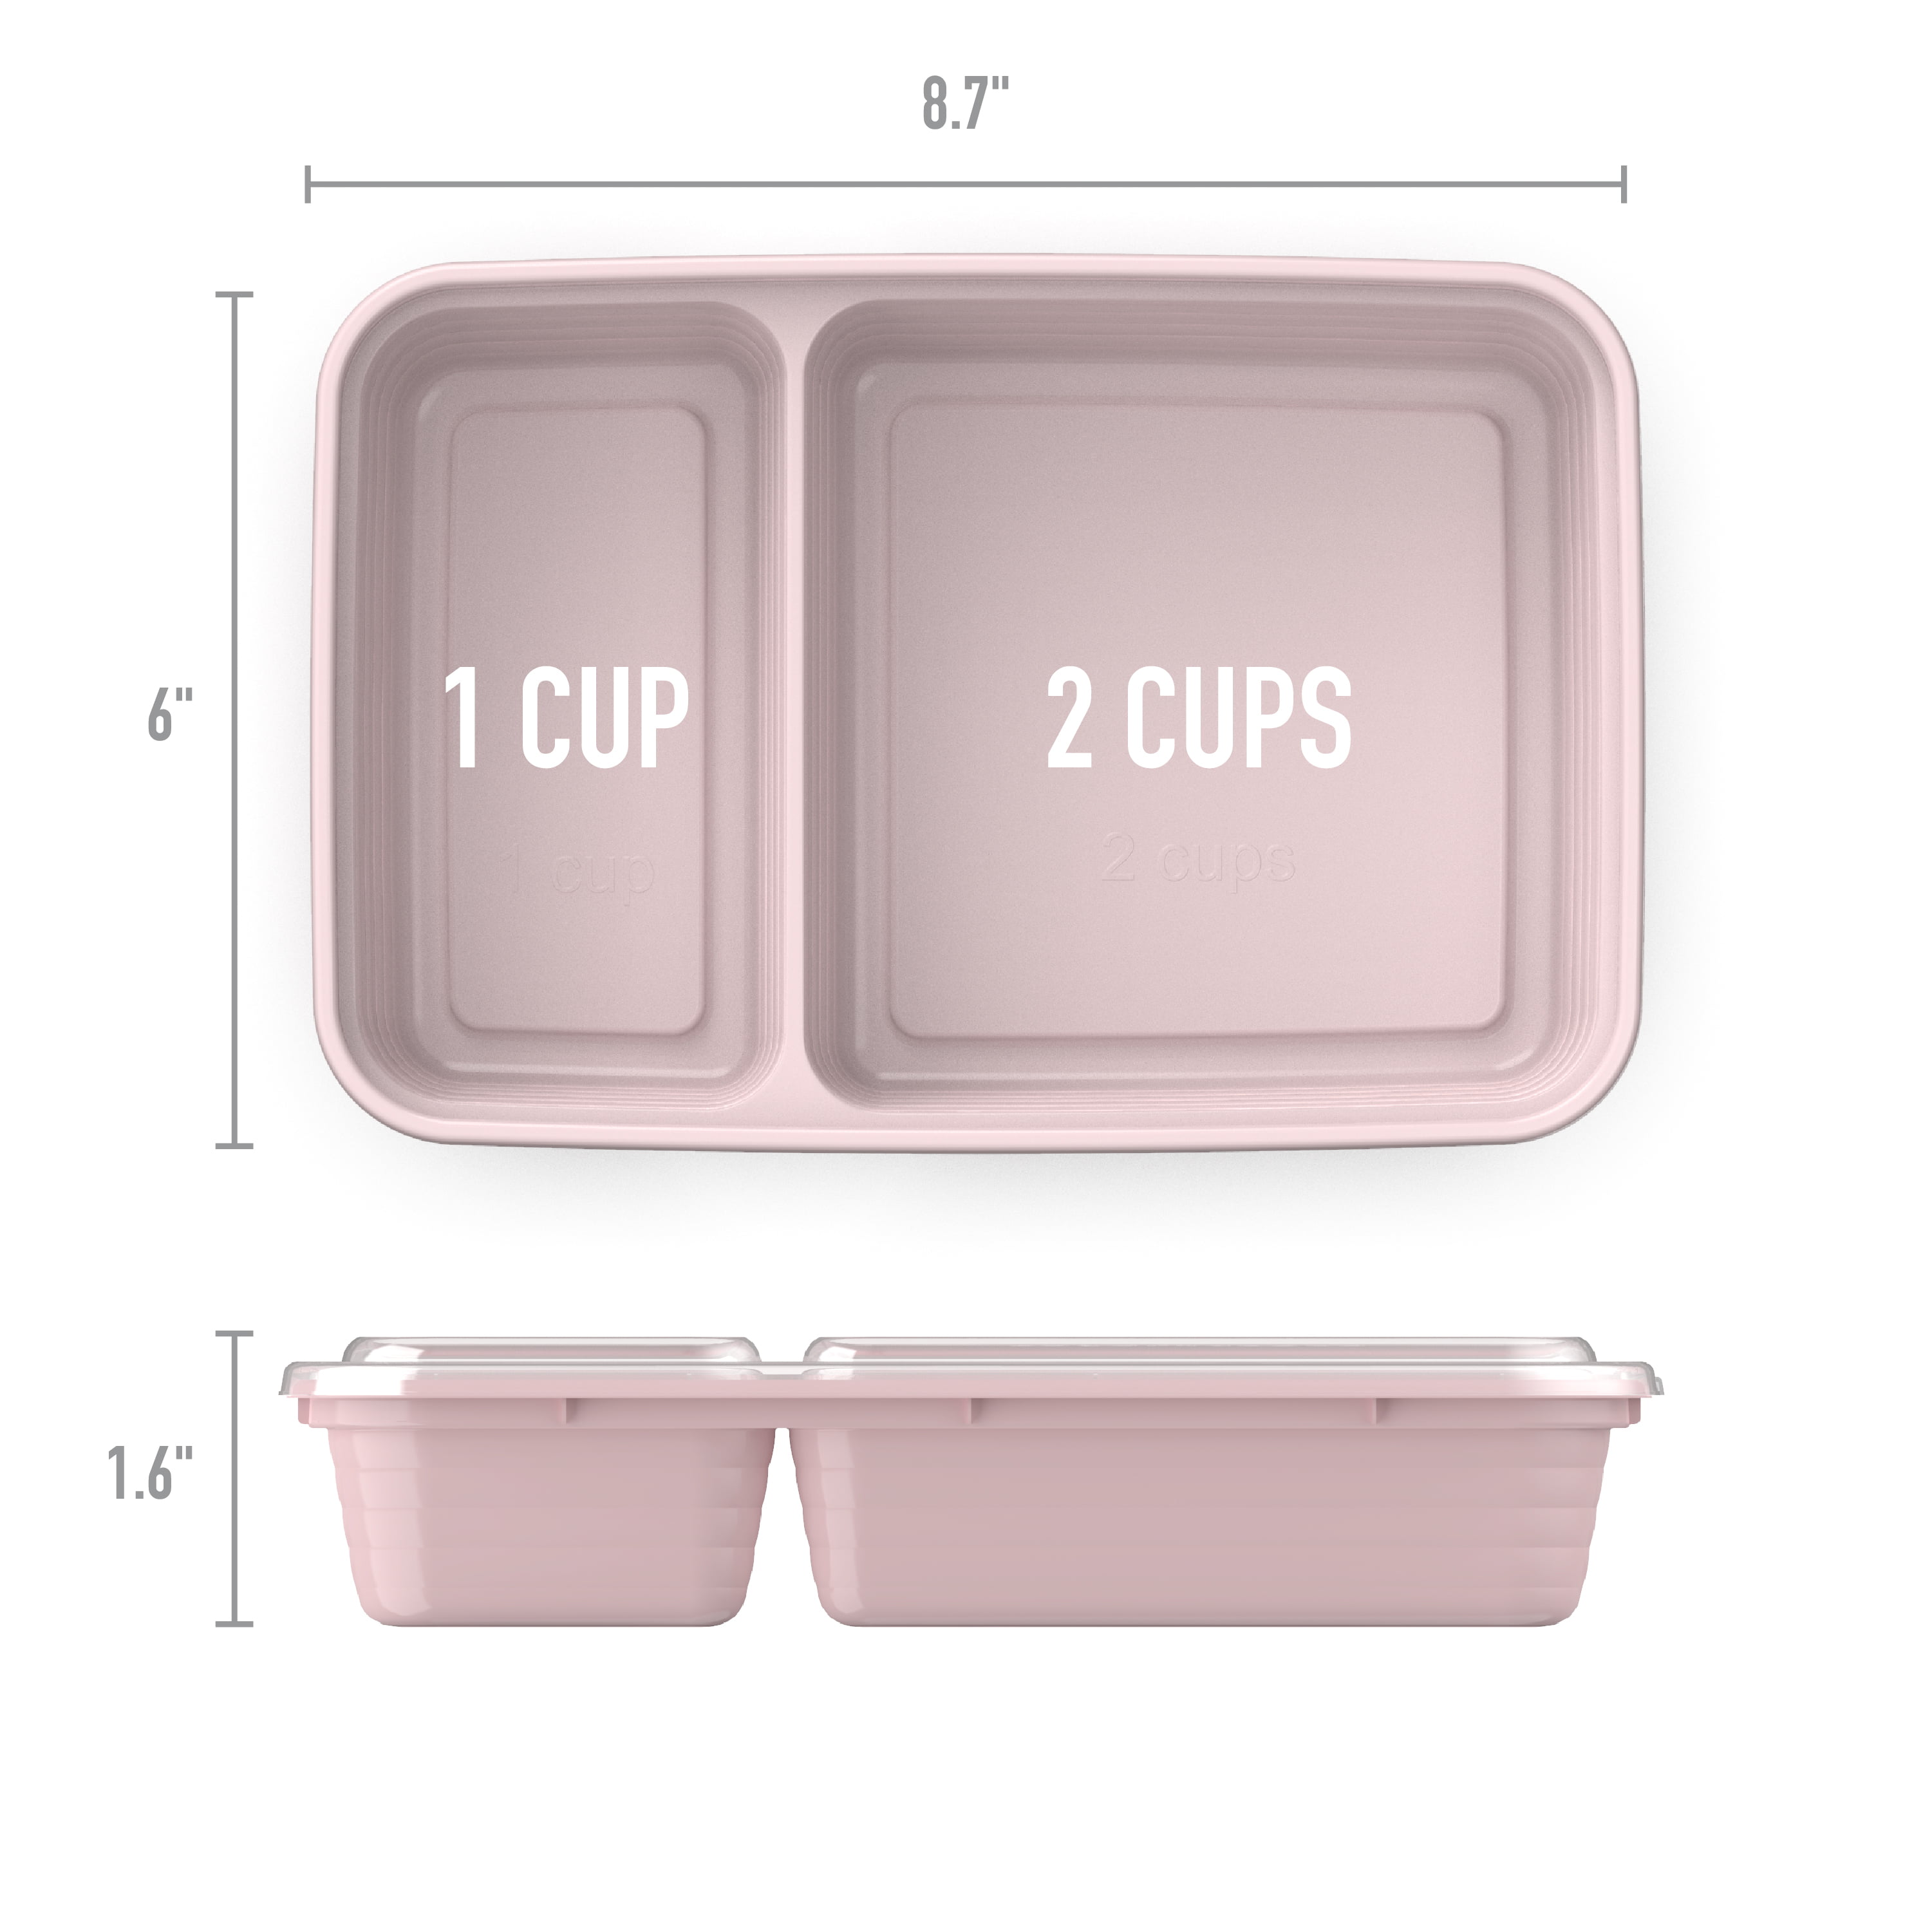 Bentgo Prep 2 Compartment Containers Burgundy 10 ct | Target